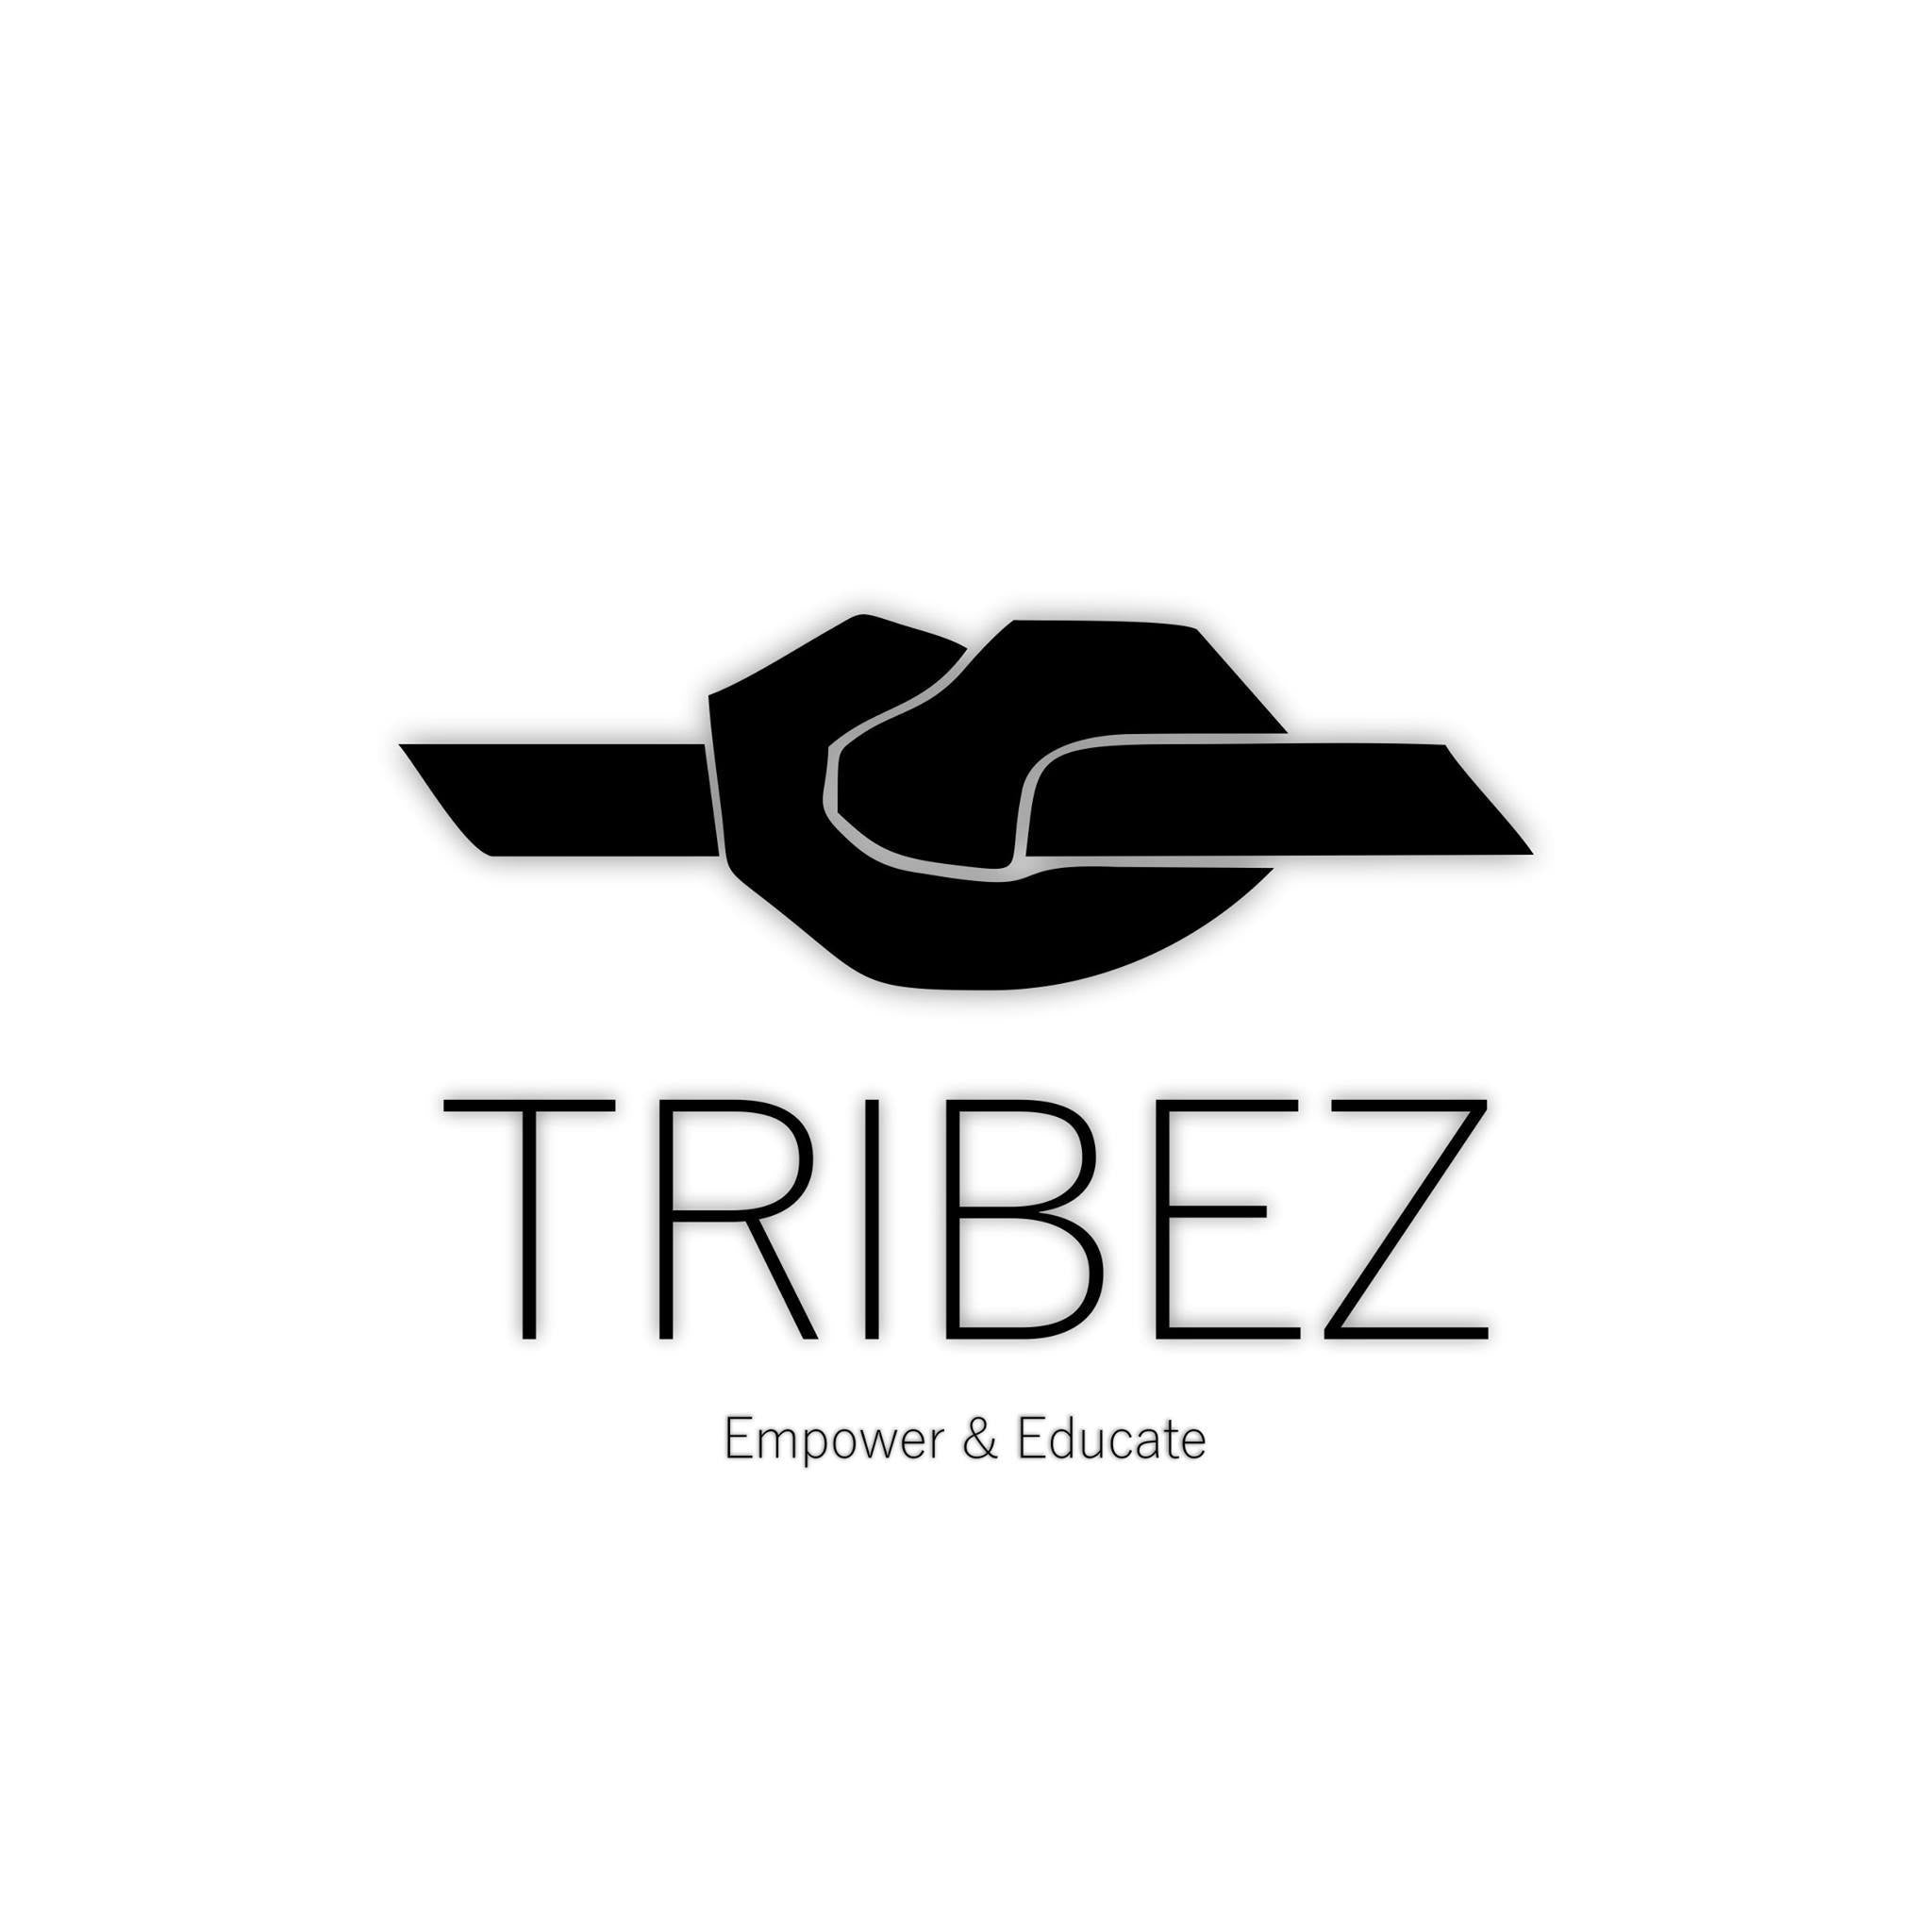 Student Association, based in The Hague: Tribez